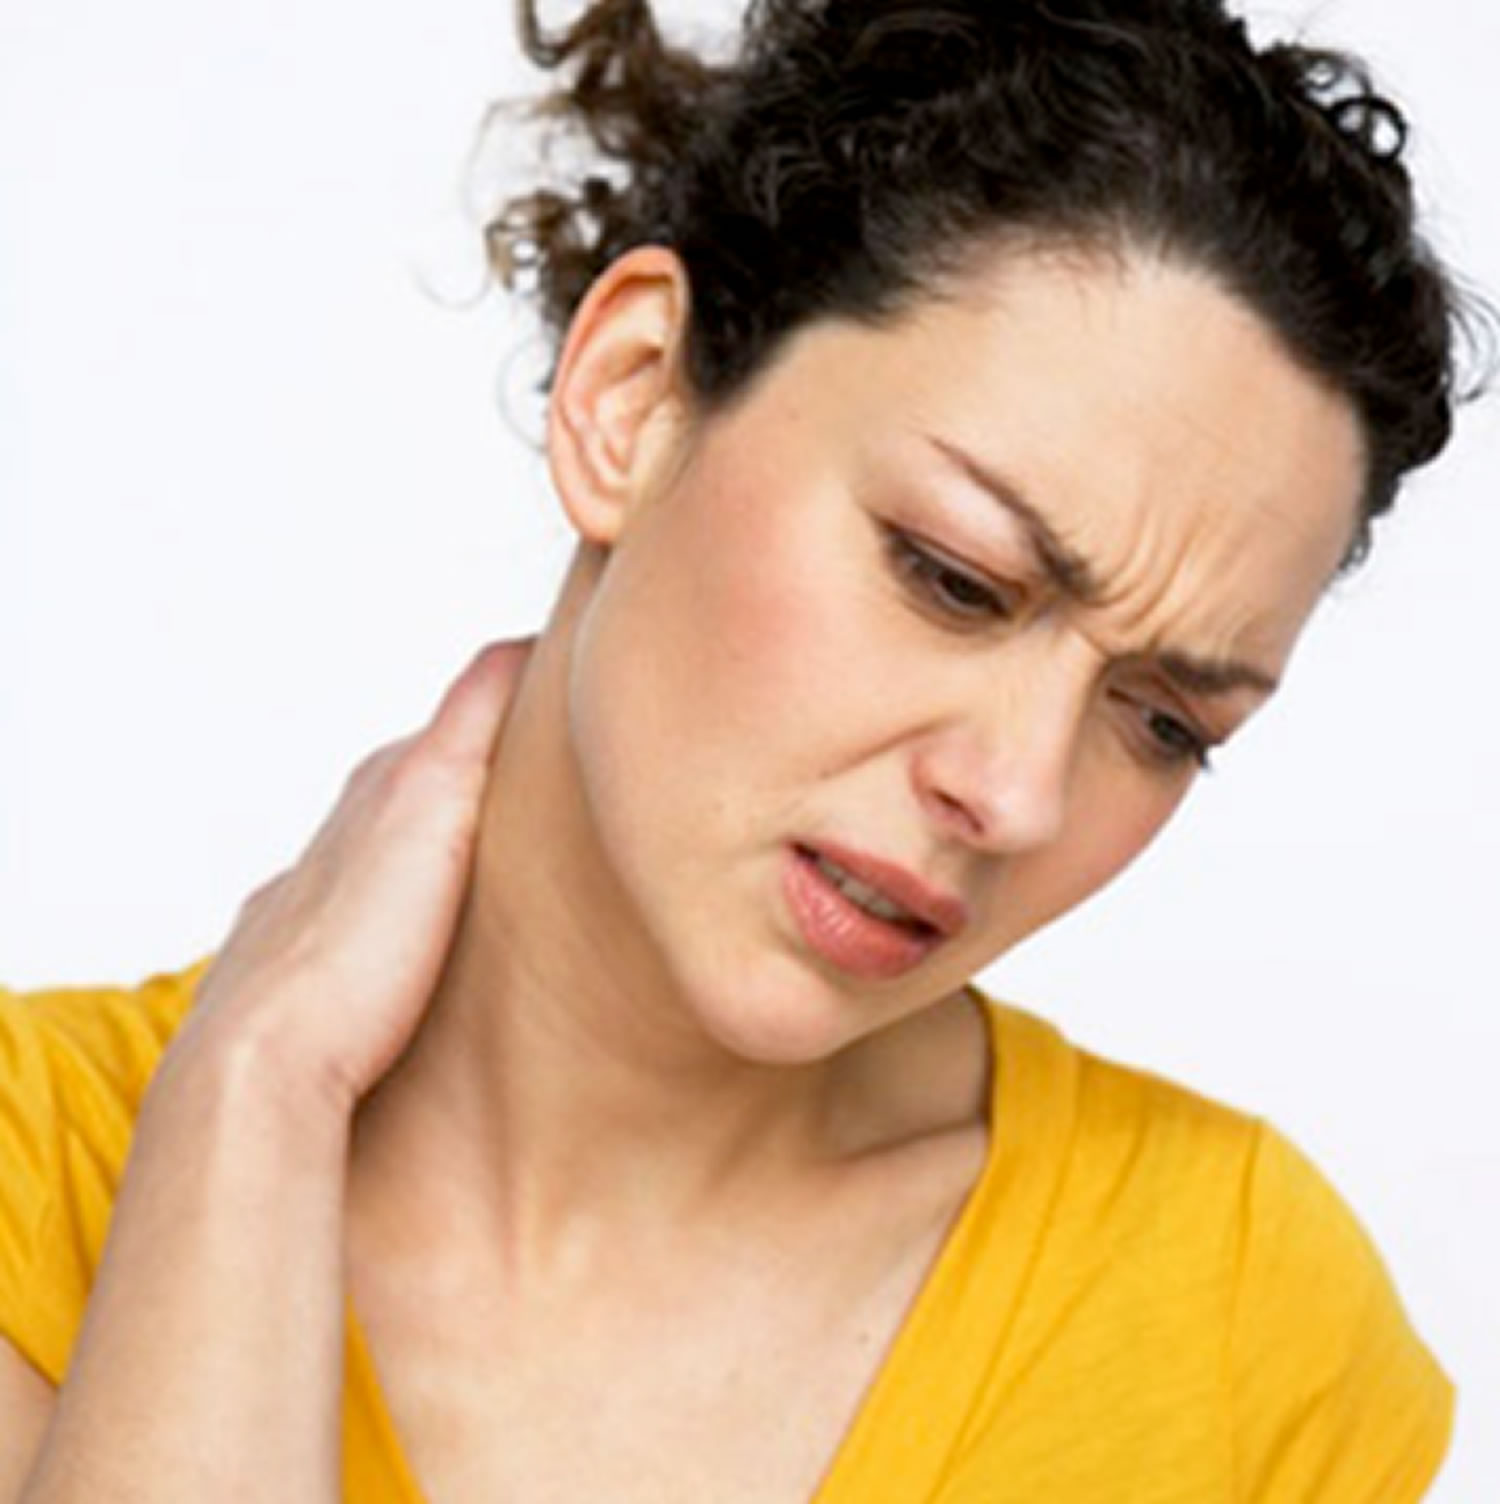 stiff neck and headache - causes, duration, pain relief and treatment